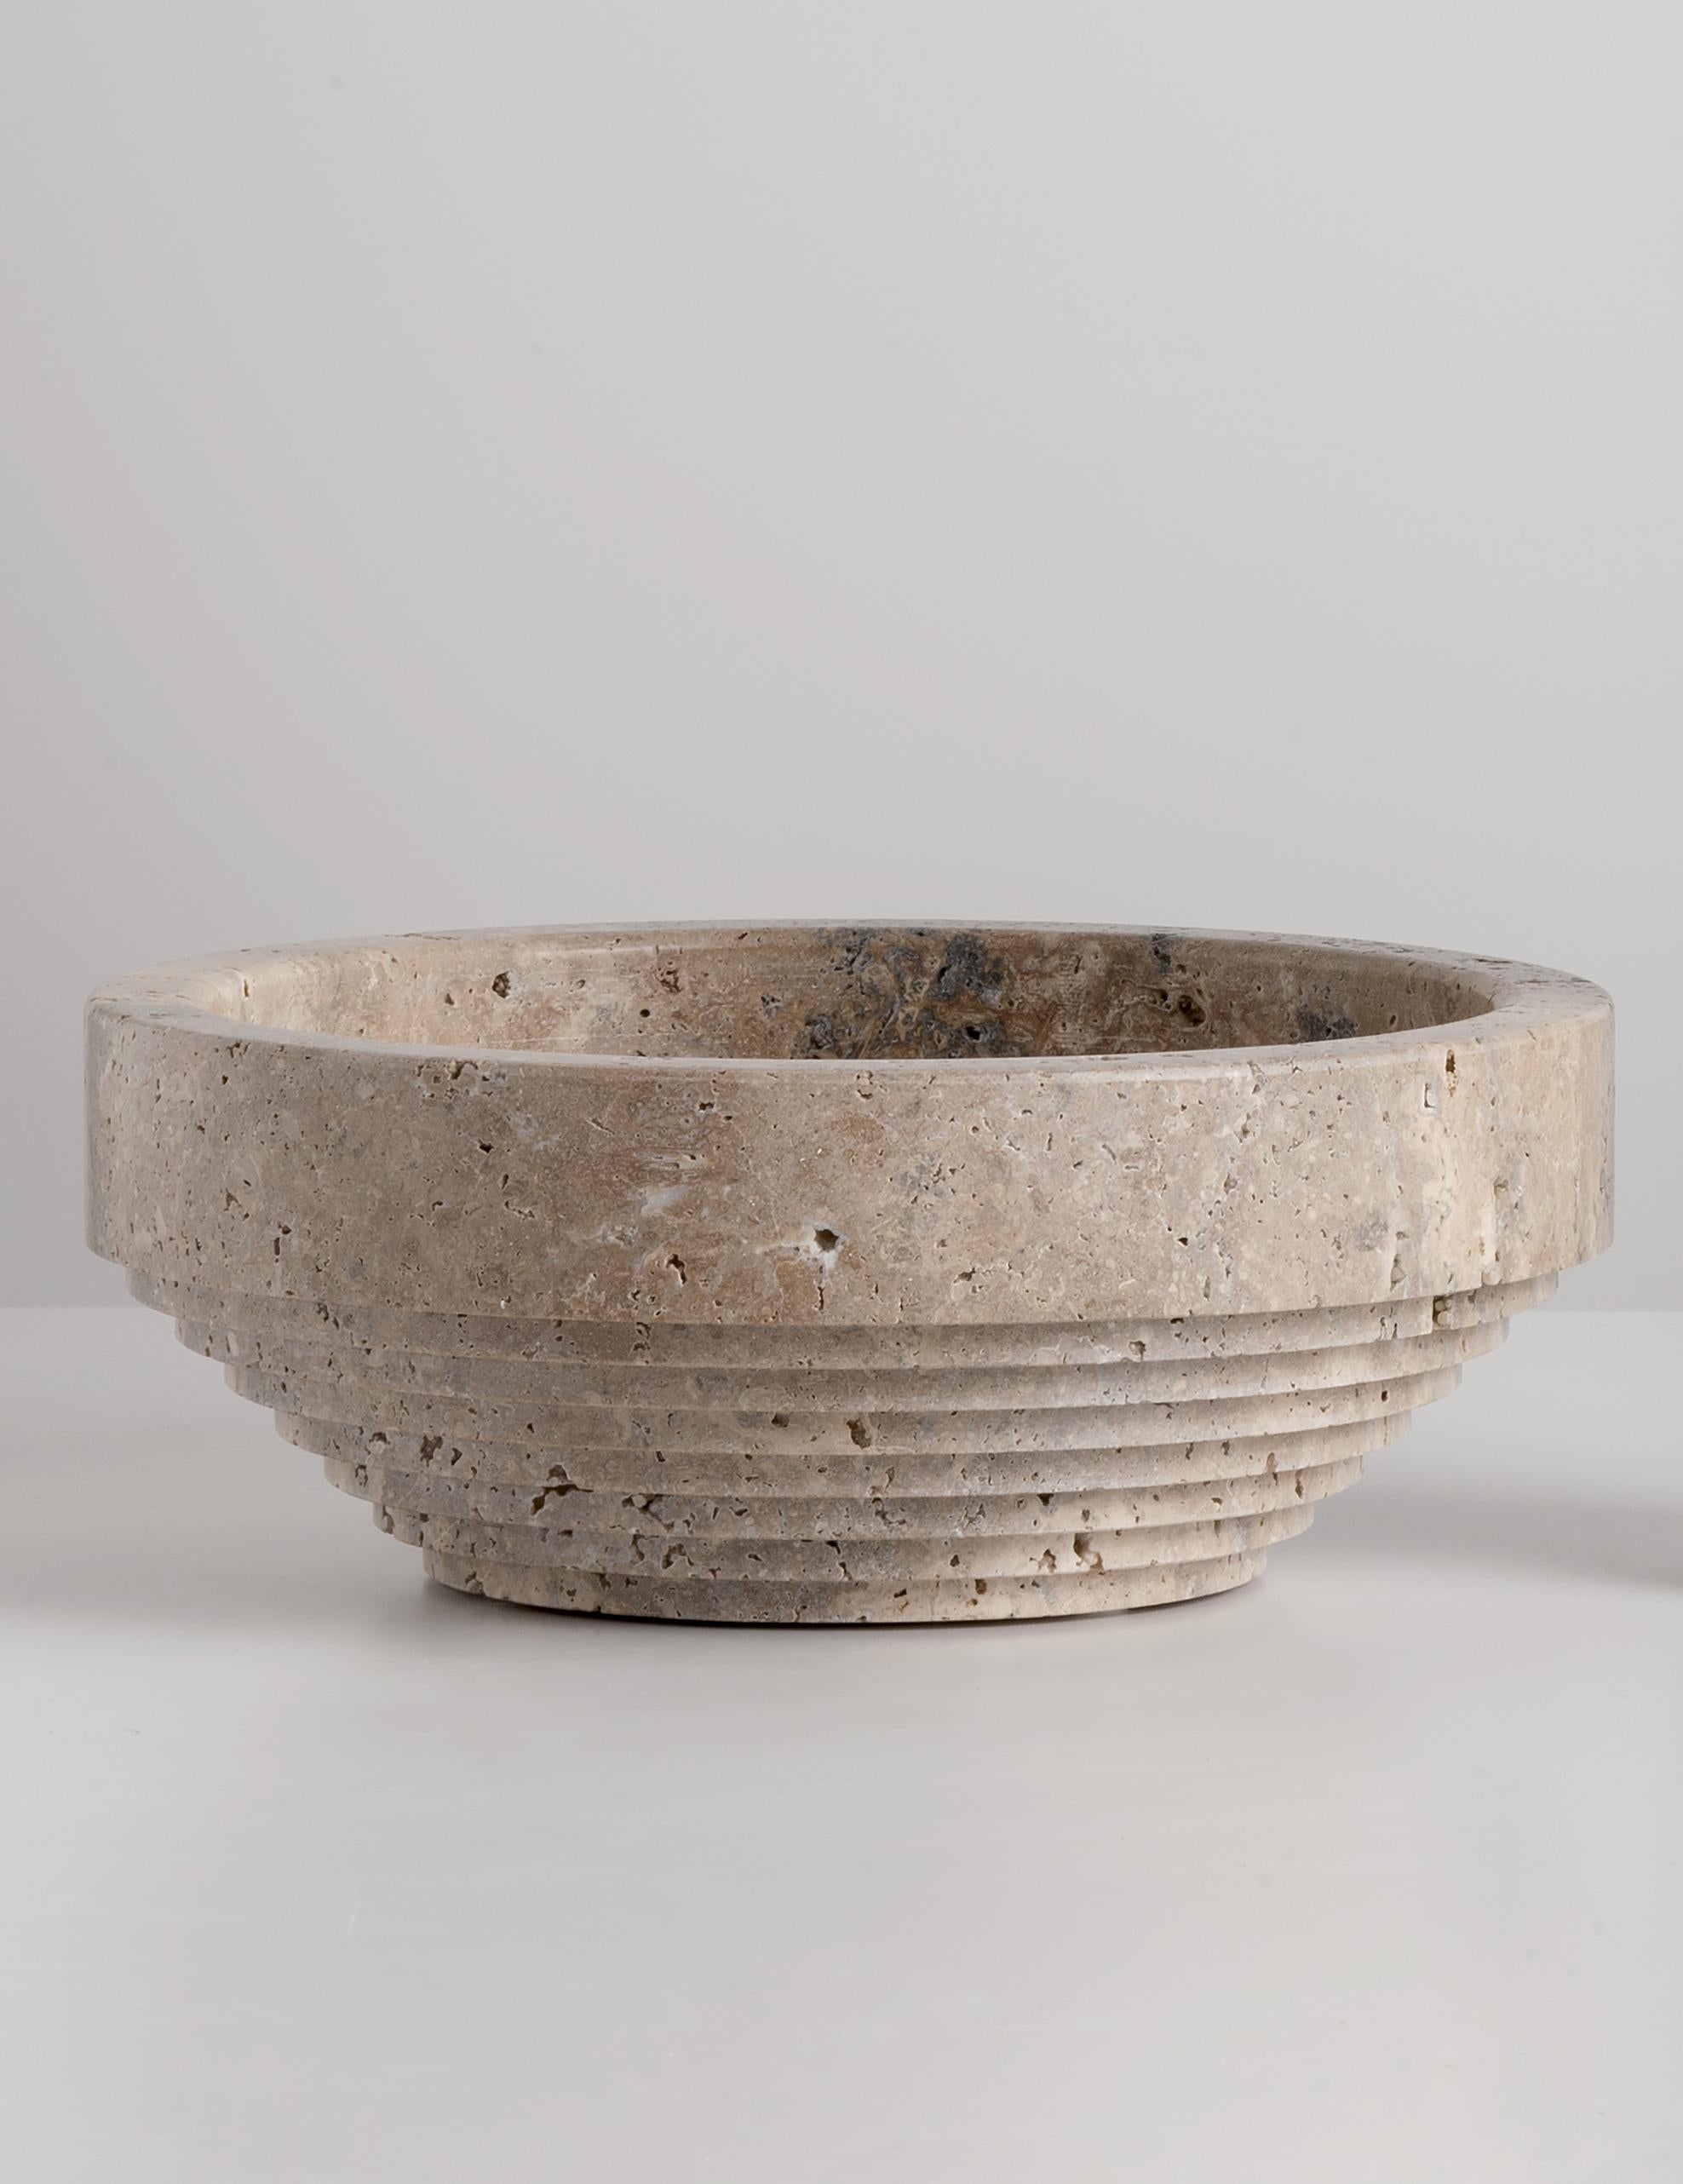 Travertine Trieste Bowl by Andrea Bonini
Limited Edition
Dimensions: Ø 25 x H 10 cm.
Materials: Travertine.

Limited series, numbered and signed pieces. Custom size or finish on request. Different marble options available: Palissandro tigrato,